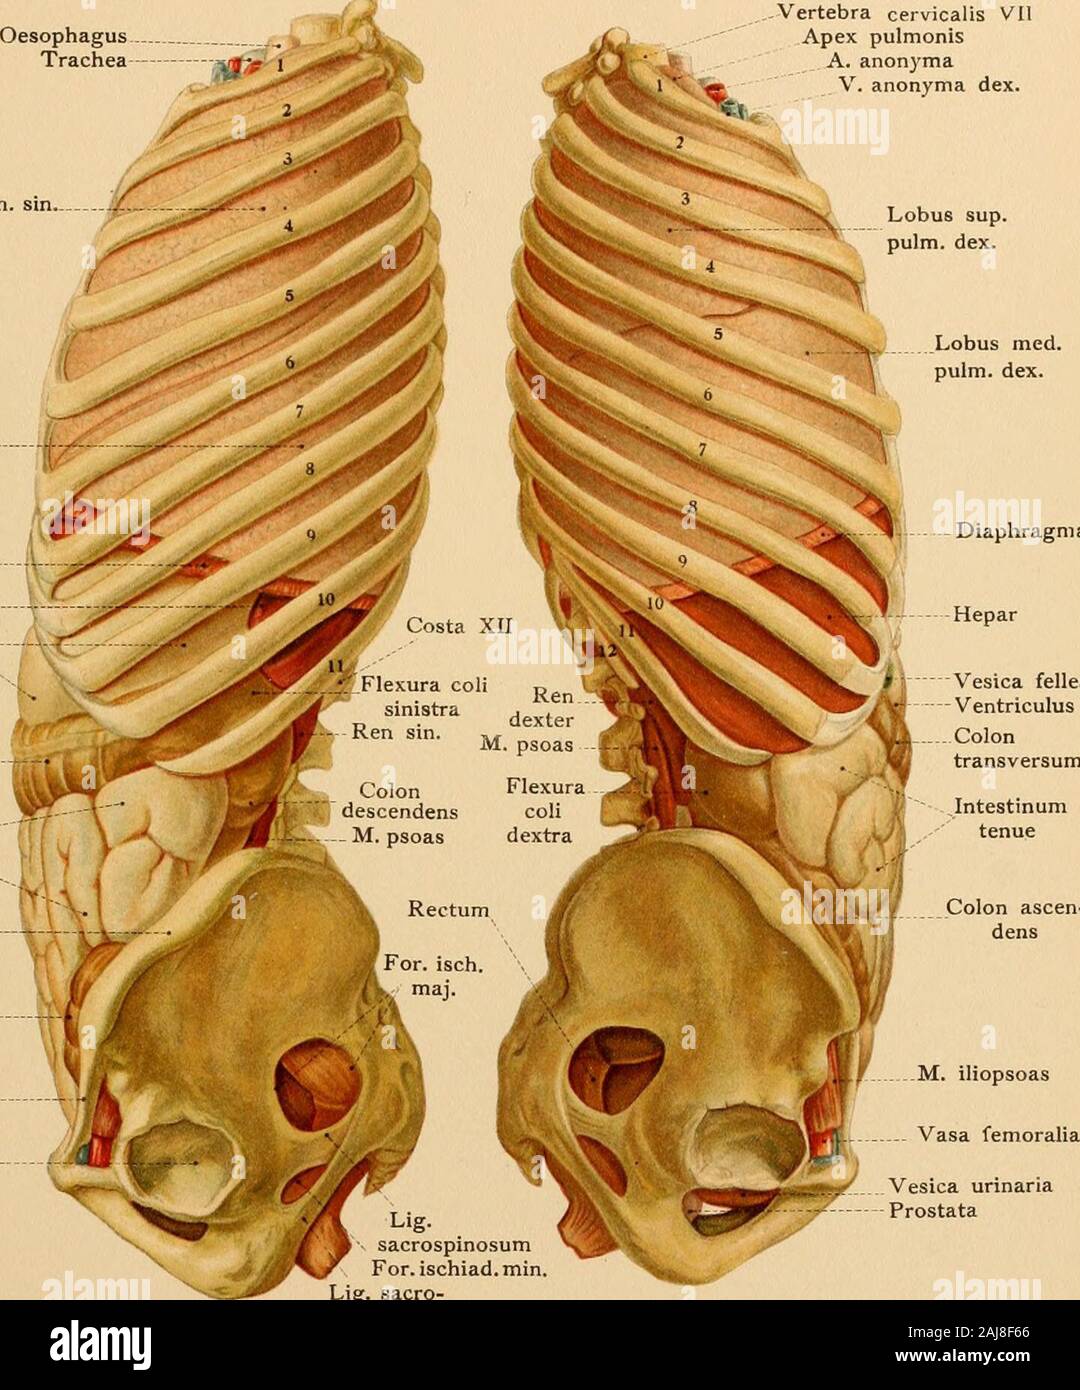 Atlas and text-book of topographic and applied anatomy . Transverse colon ::^r i / ominal m anul 1 — &lt; the tendinous iiinal wall,abdominal wall may al:   inch of the external iliac ,  smj, „.,, ., :u.- lumborum from oiin of the I -sjubcuta :. or epigastri • 1 .  m^lAl^CI [ bdomind •«  (which ai , 2 ii.n • .-?) f . m ,.,,,,t W !yh run / rins behind th&lt;/gin to the Vi I  nor abdomin; I Y hrou^h the  ? ^ / tomach, of th n, and of the n from the ve: I d from the infi / . mxnKal ^niiQin ns of numerous a  Tab. 13. Diaphragma. Lobus sup. pulm. sin Lobus inf. pulm Diaphragma X Lien Stock Photo